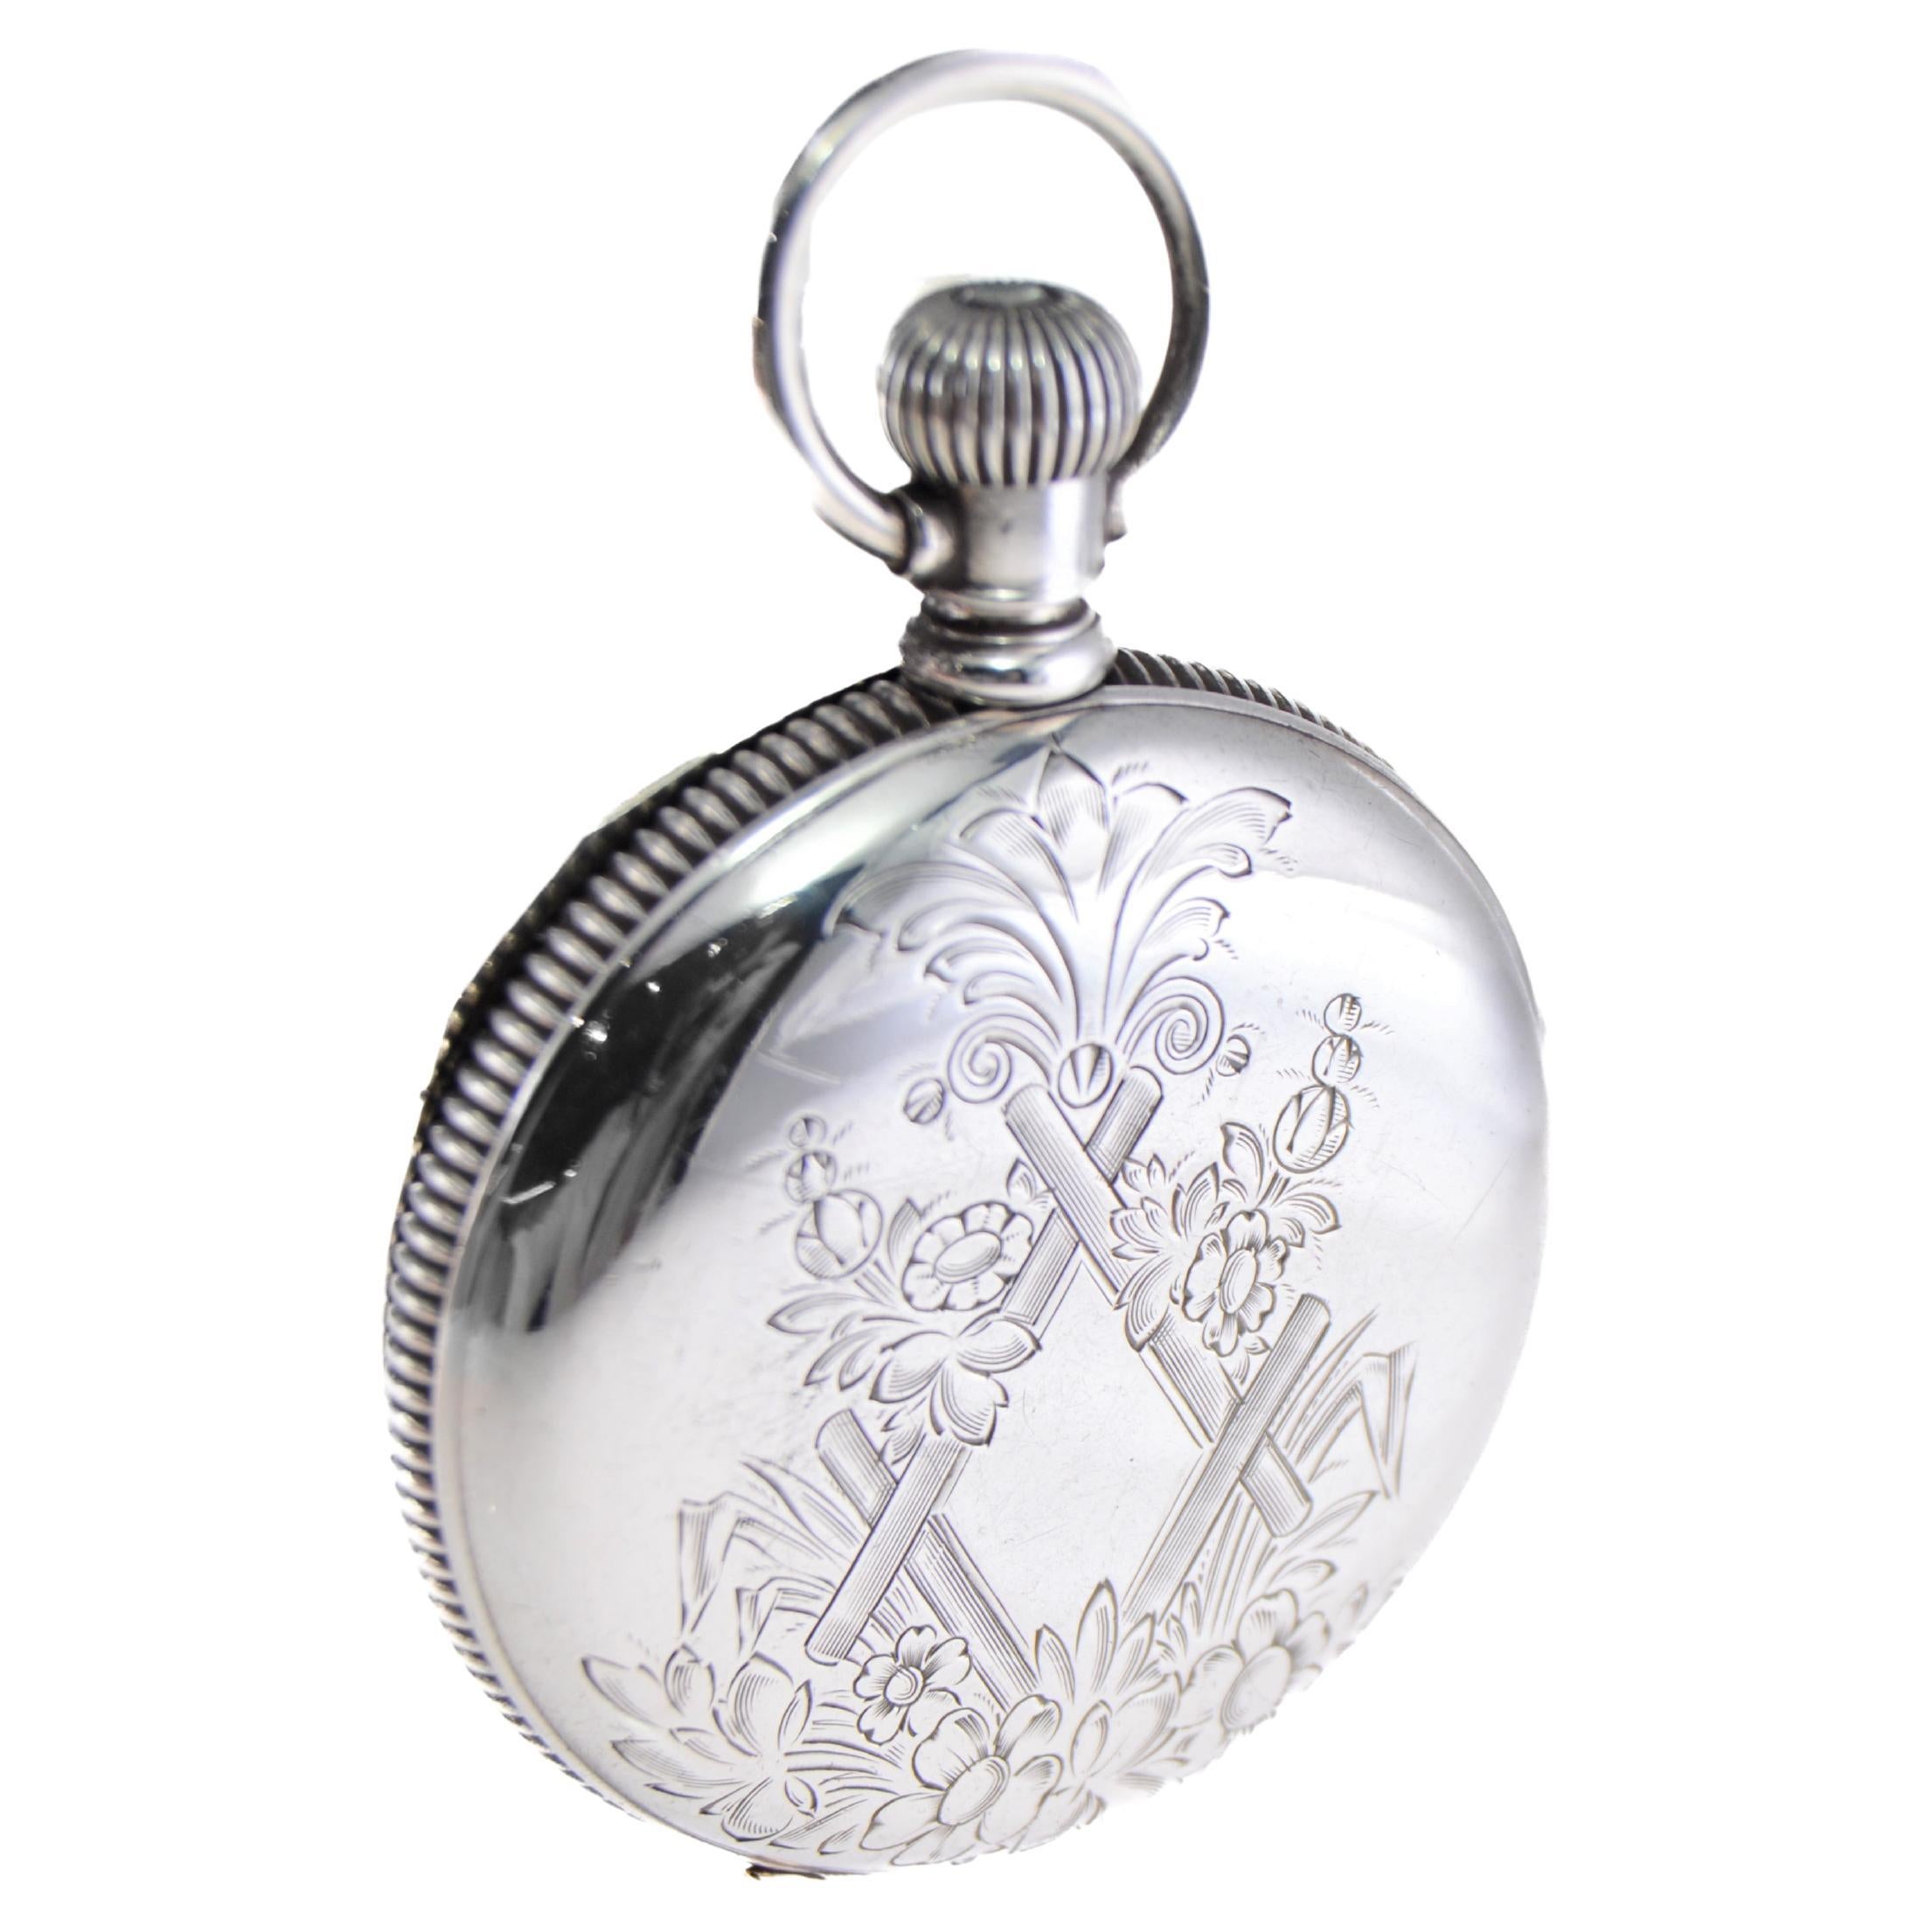 Illinois Silver Hunters Case Pocket Watch from 1893 with Pocket Watch Chain  2